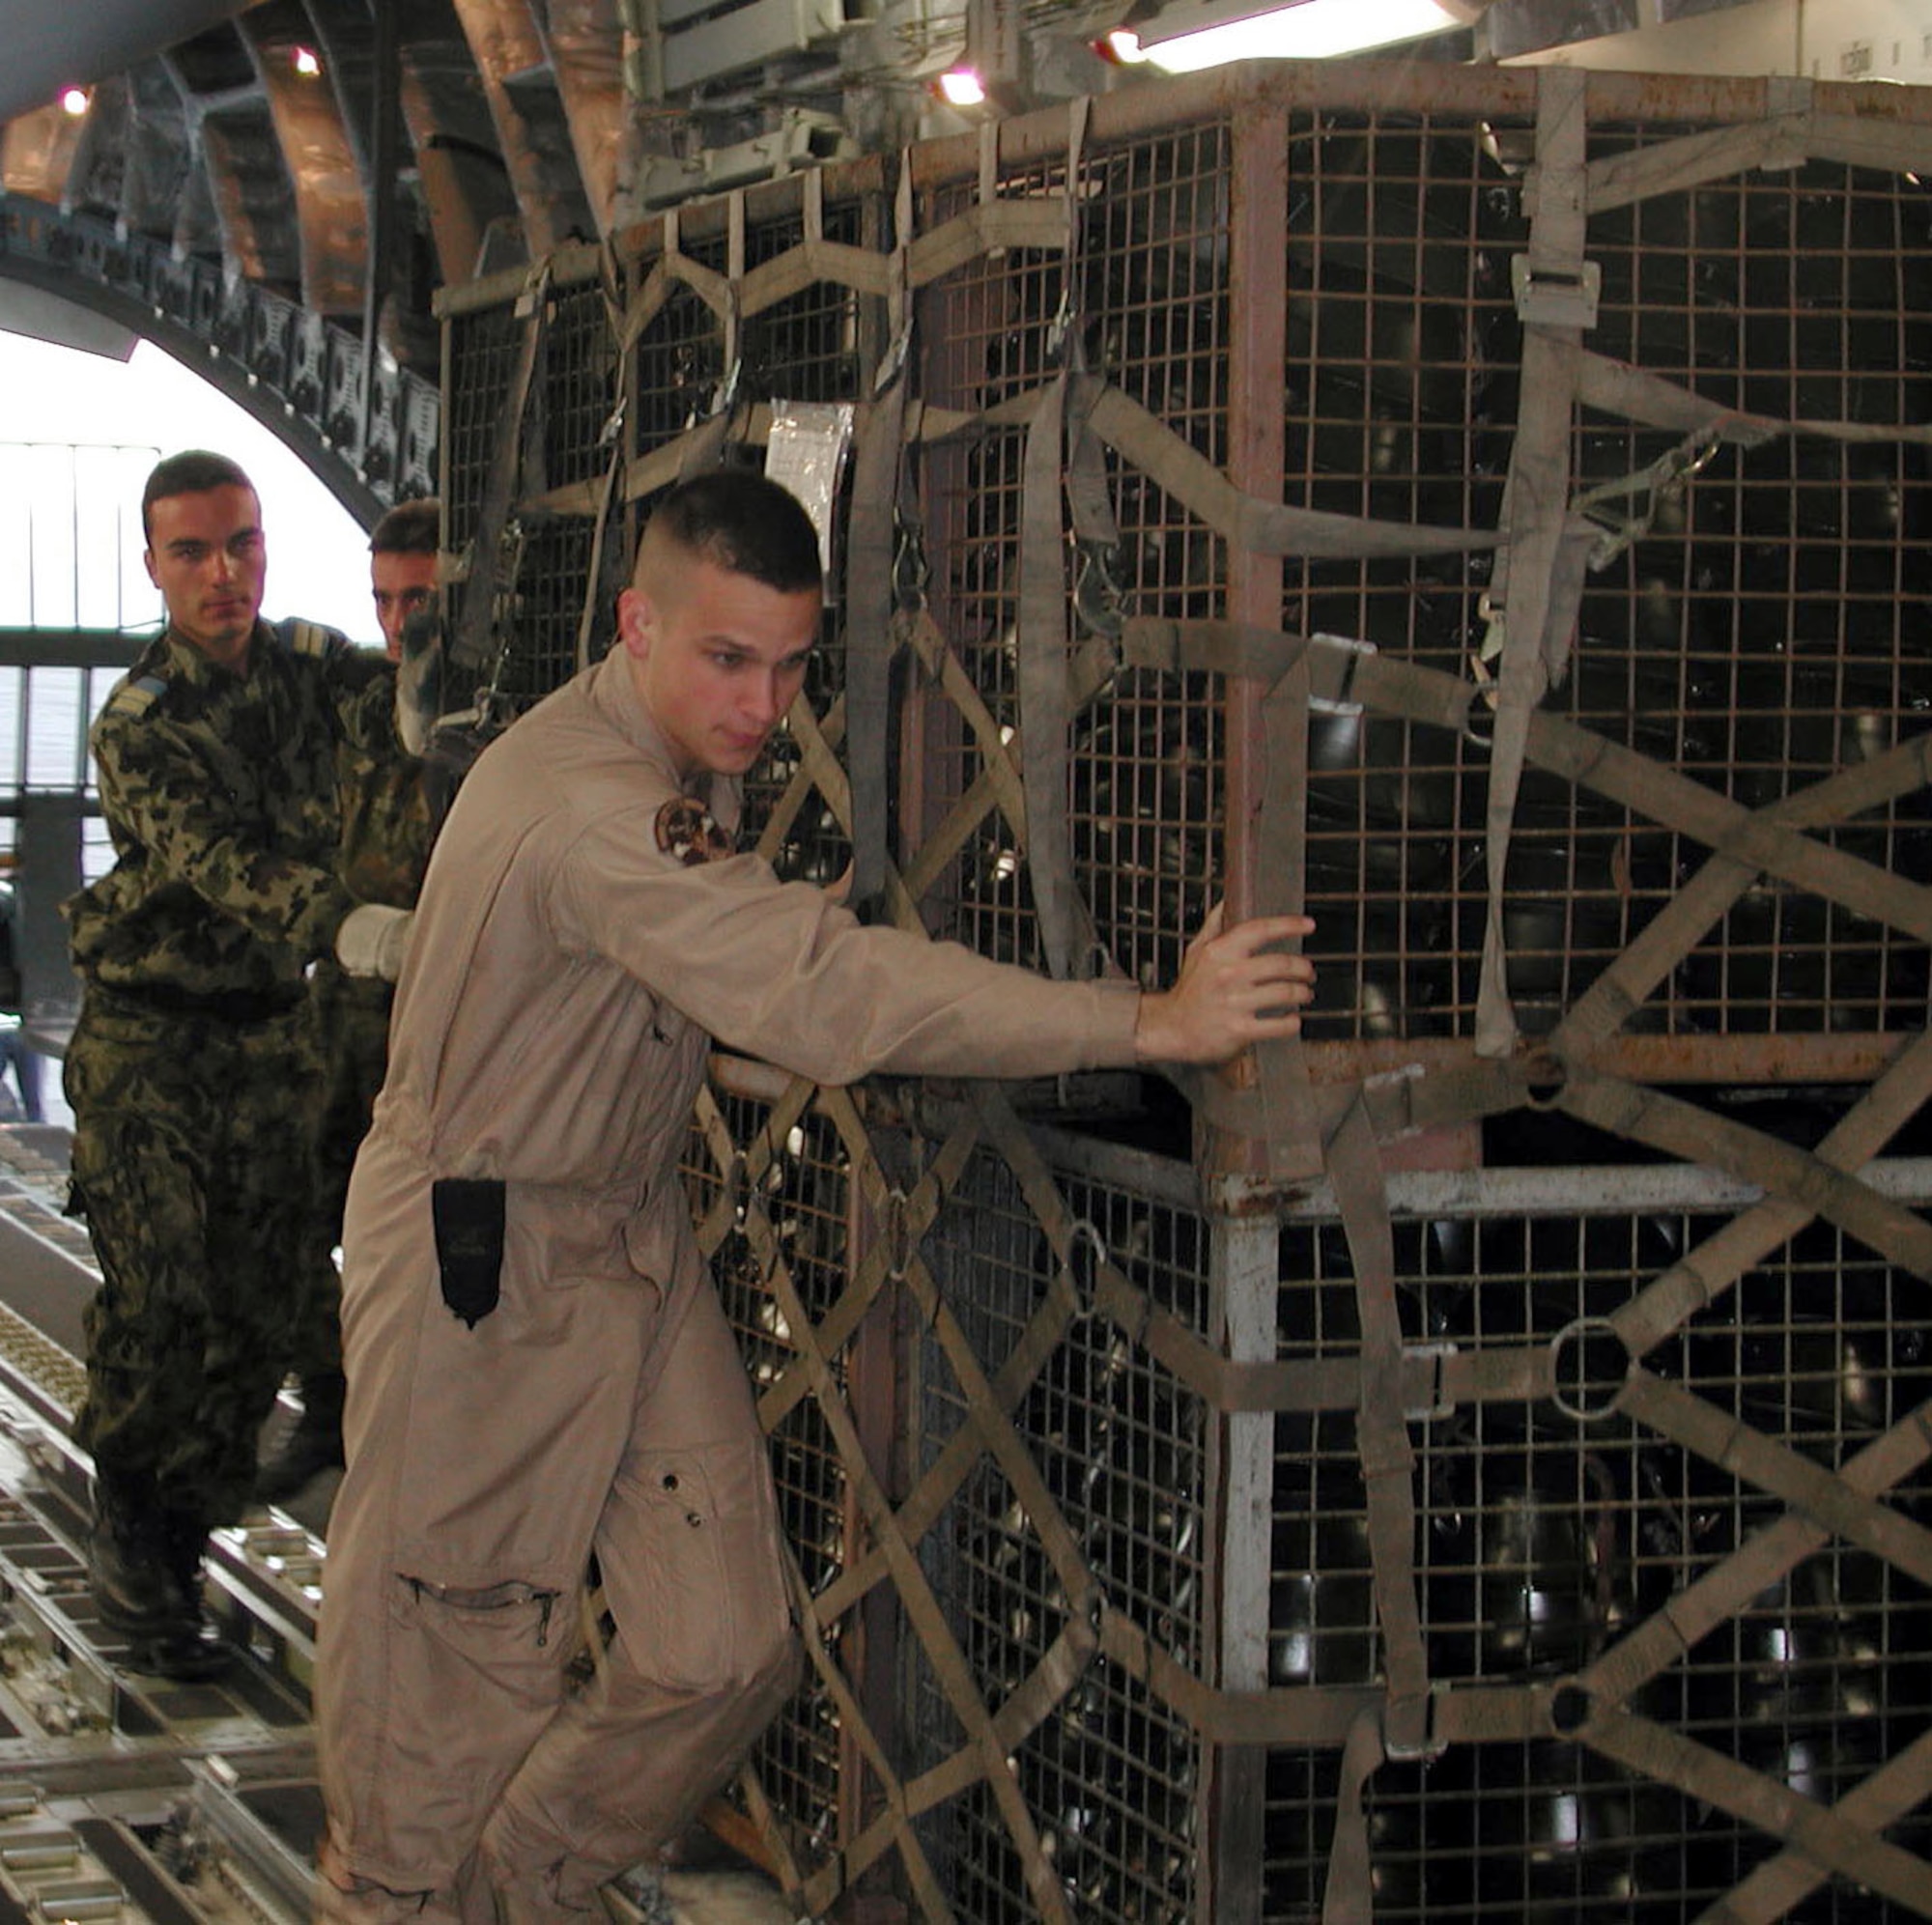 MIHAIL KOGALNICEANU AIR BASE, Romania -- Senior Airman Derrick Dirmeyer helps Romanian airmen load 17 pallets of military helmets onto a C-17 Globemaster III here June 24.  The helmets were donated by the Romanian government to the Afghan army and flown to Afghanistan by a U.S. Air Force Reserve aircrew from the 97th Airlift Squadron at McChord Air Force Base, Wash.  Airman Dirmeyer is a crew chief assigned to the 62nd Aircraft Maintenance Squadron at McChord AFB.  (U.S. Air Force photo by Capt. Chris Watt)